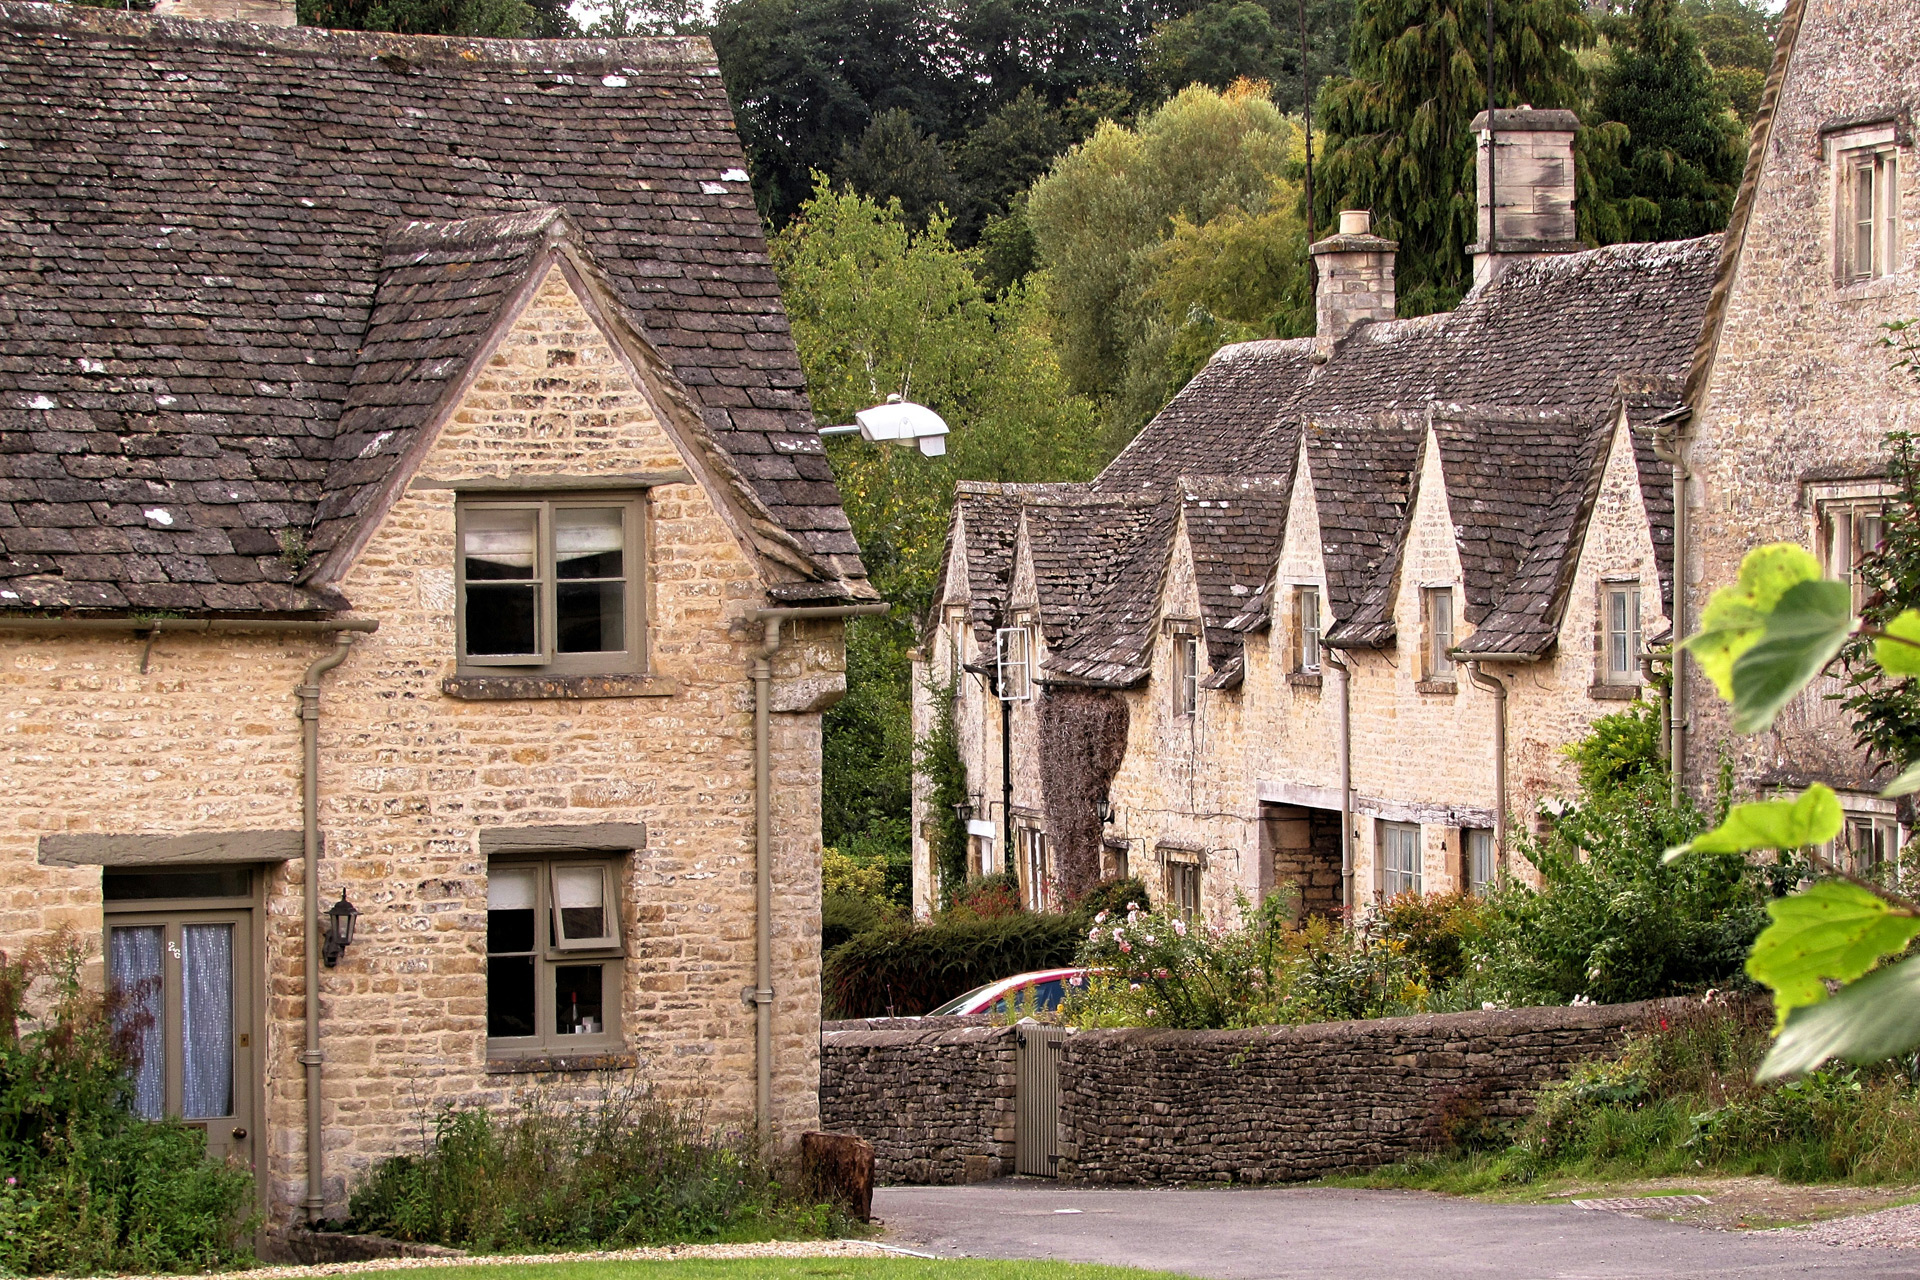 Cotswolds houses with hills in the background